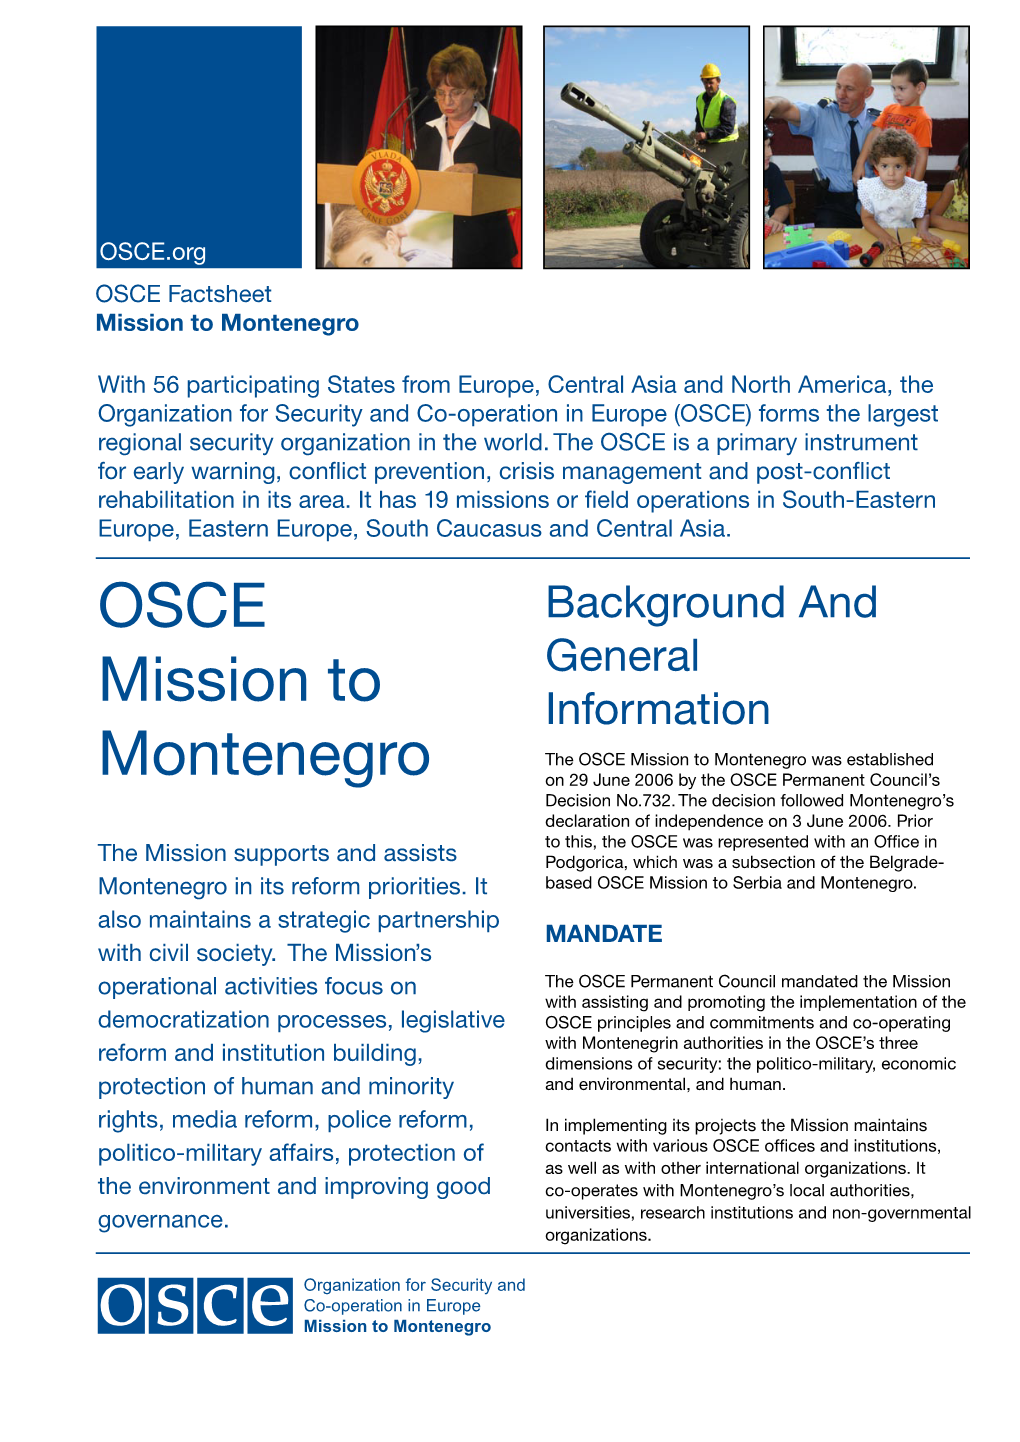 OSCE Mission to Montenegro Was Established Montenegro on 29 June 2006 by the OSCE Permanent Council’S Decision No.732